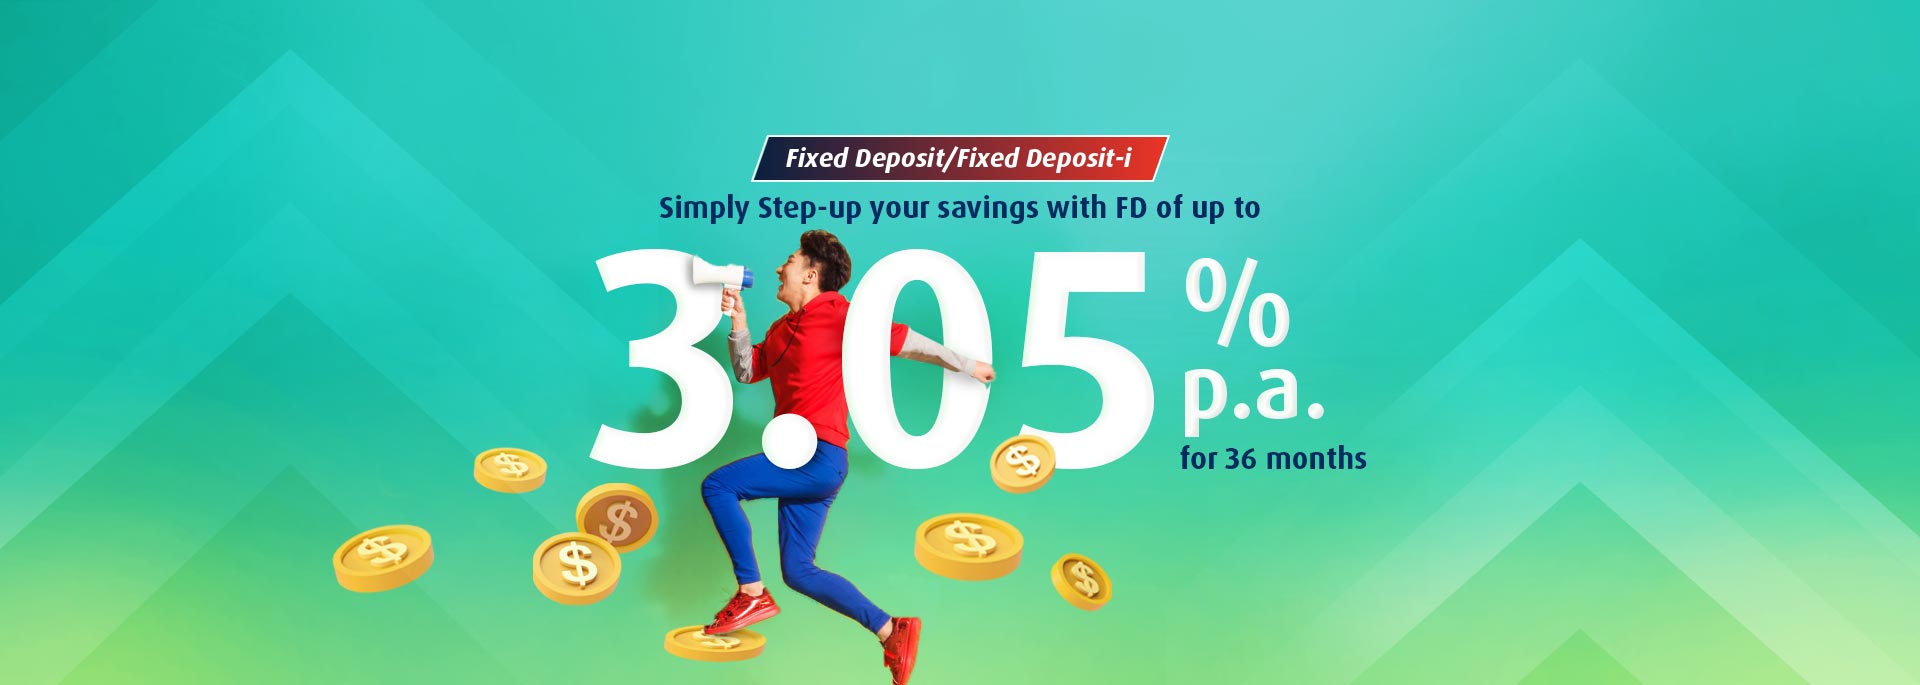 Step Up Fixed Deposit Promotion